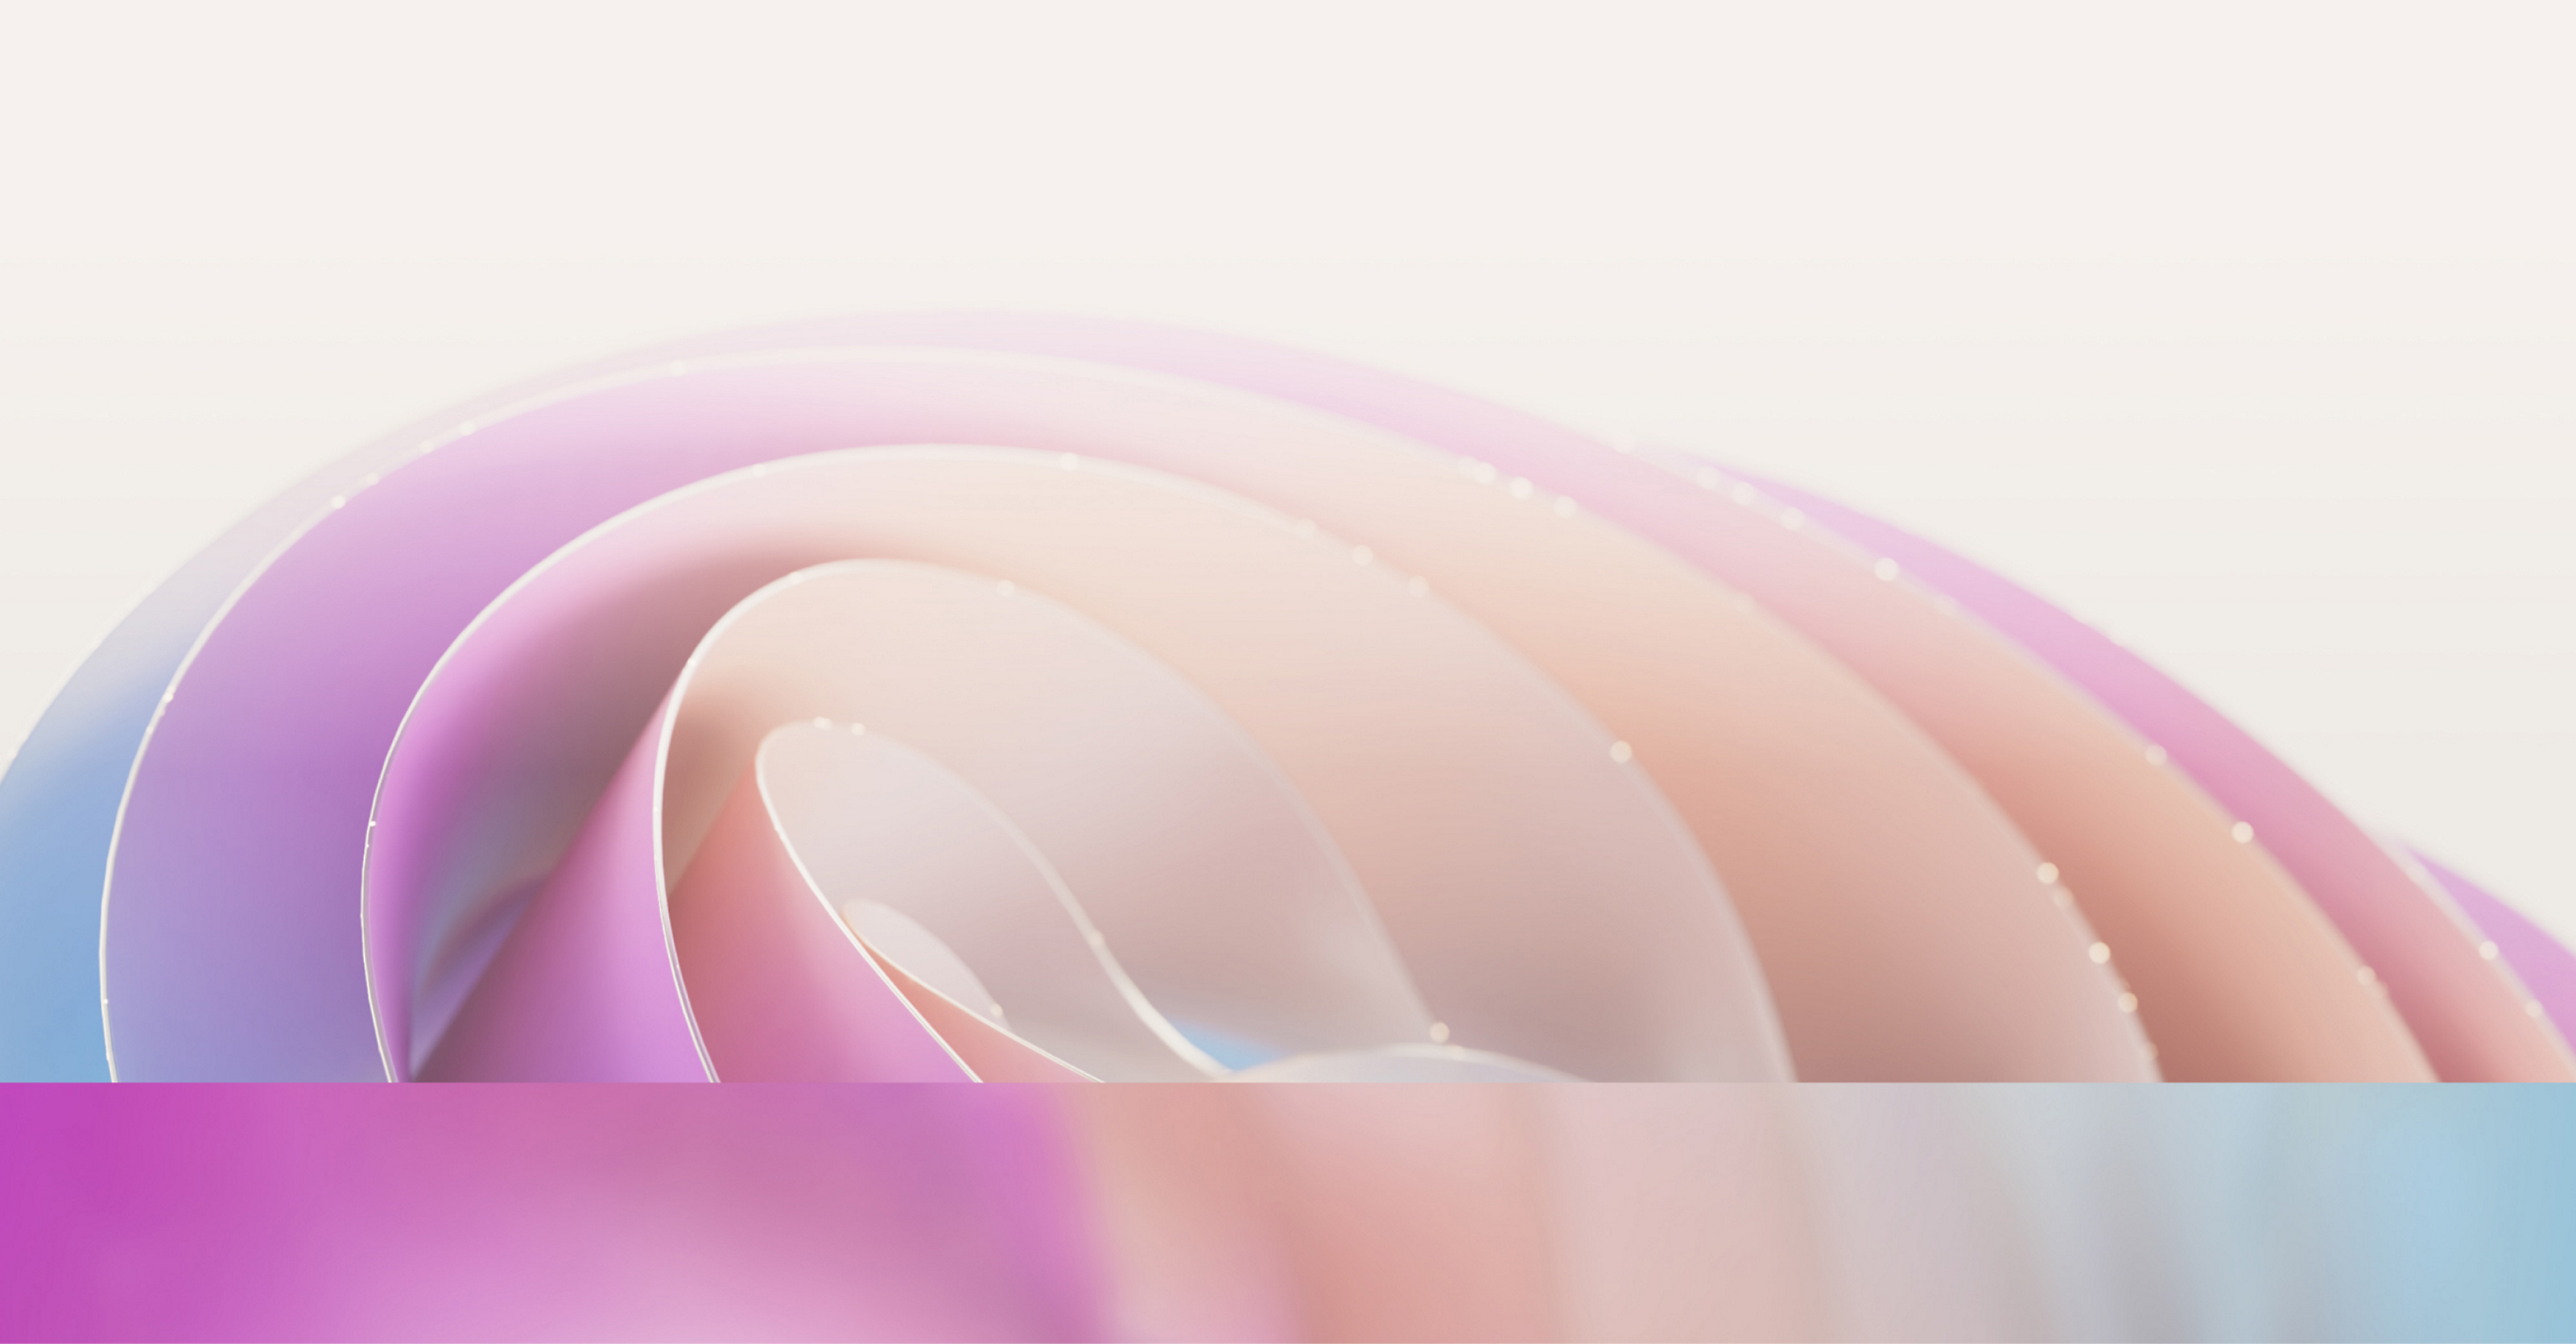 Abstract background with soft wave-like layers in pastel pink, purple, and blue hues with a glowing, soft focus effect.